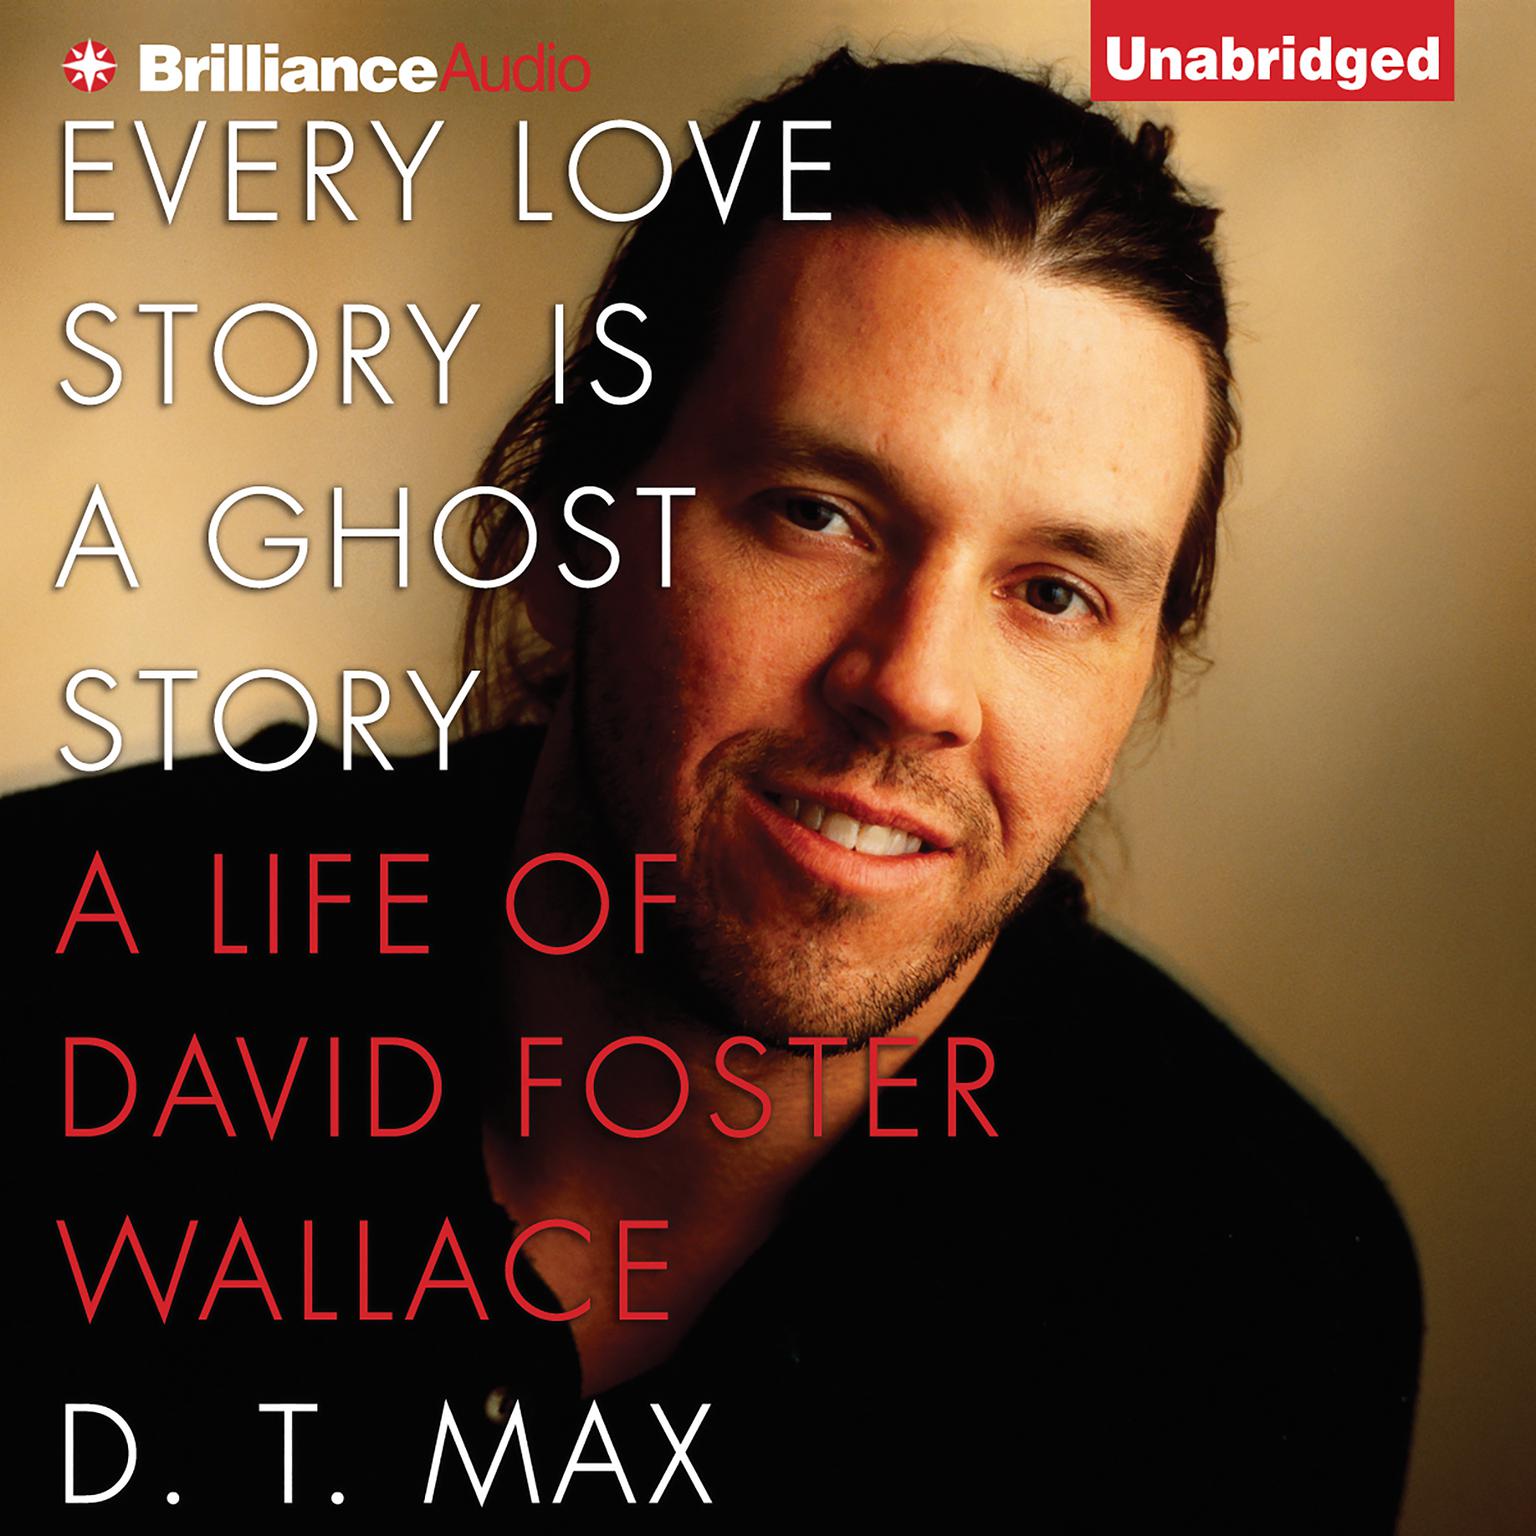 Every Love Story Is a Ghost Story: A Life of David Foster Wallace Audiobook, by D. T. Max